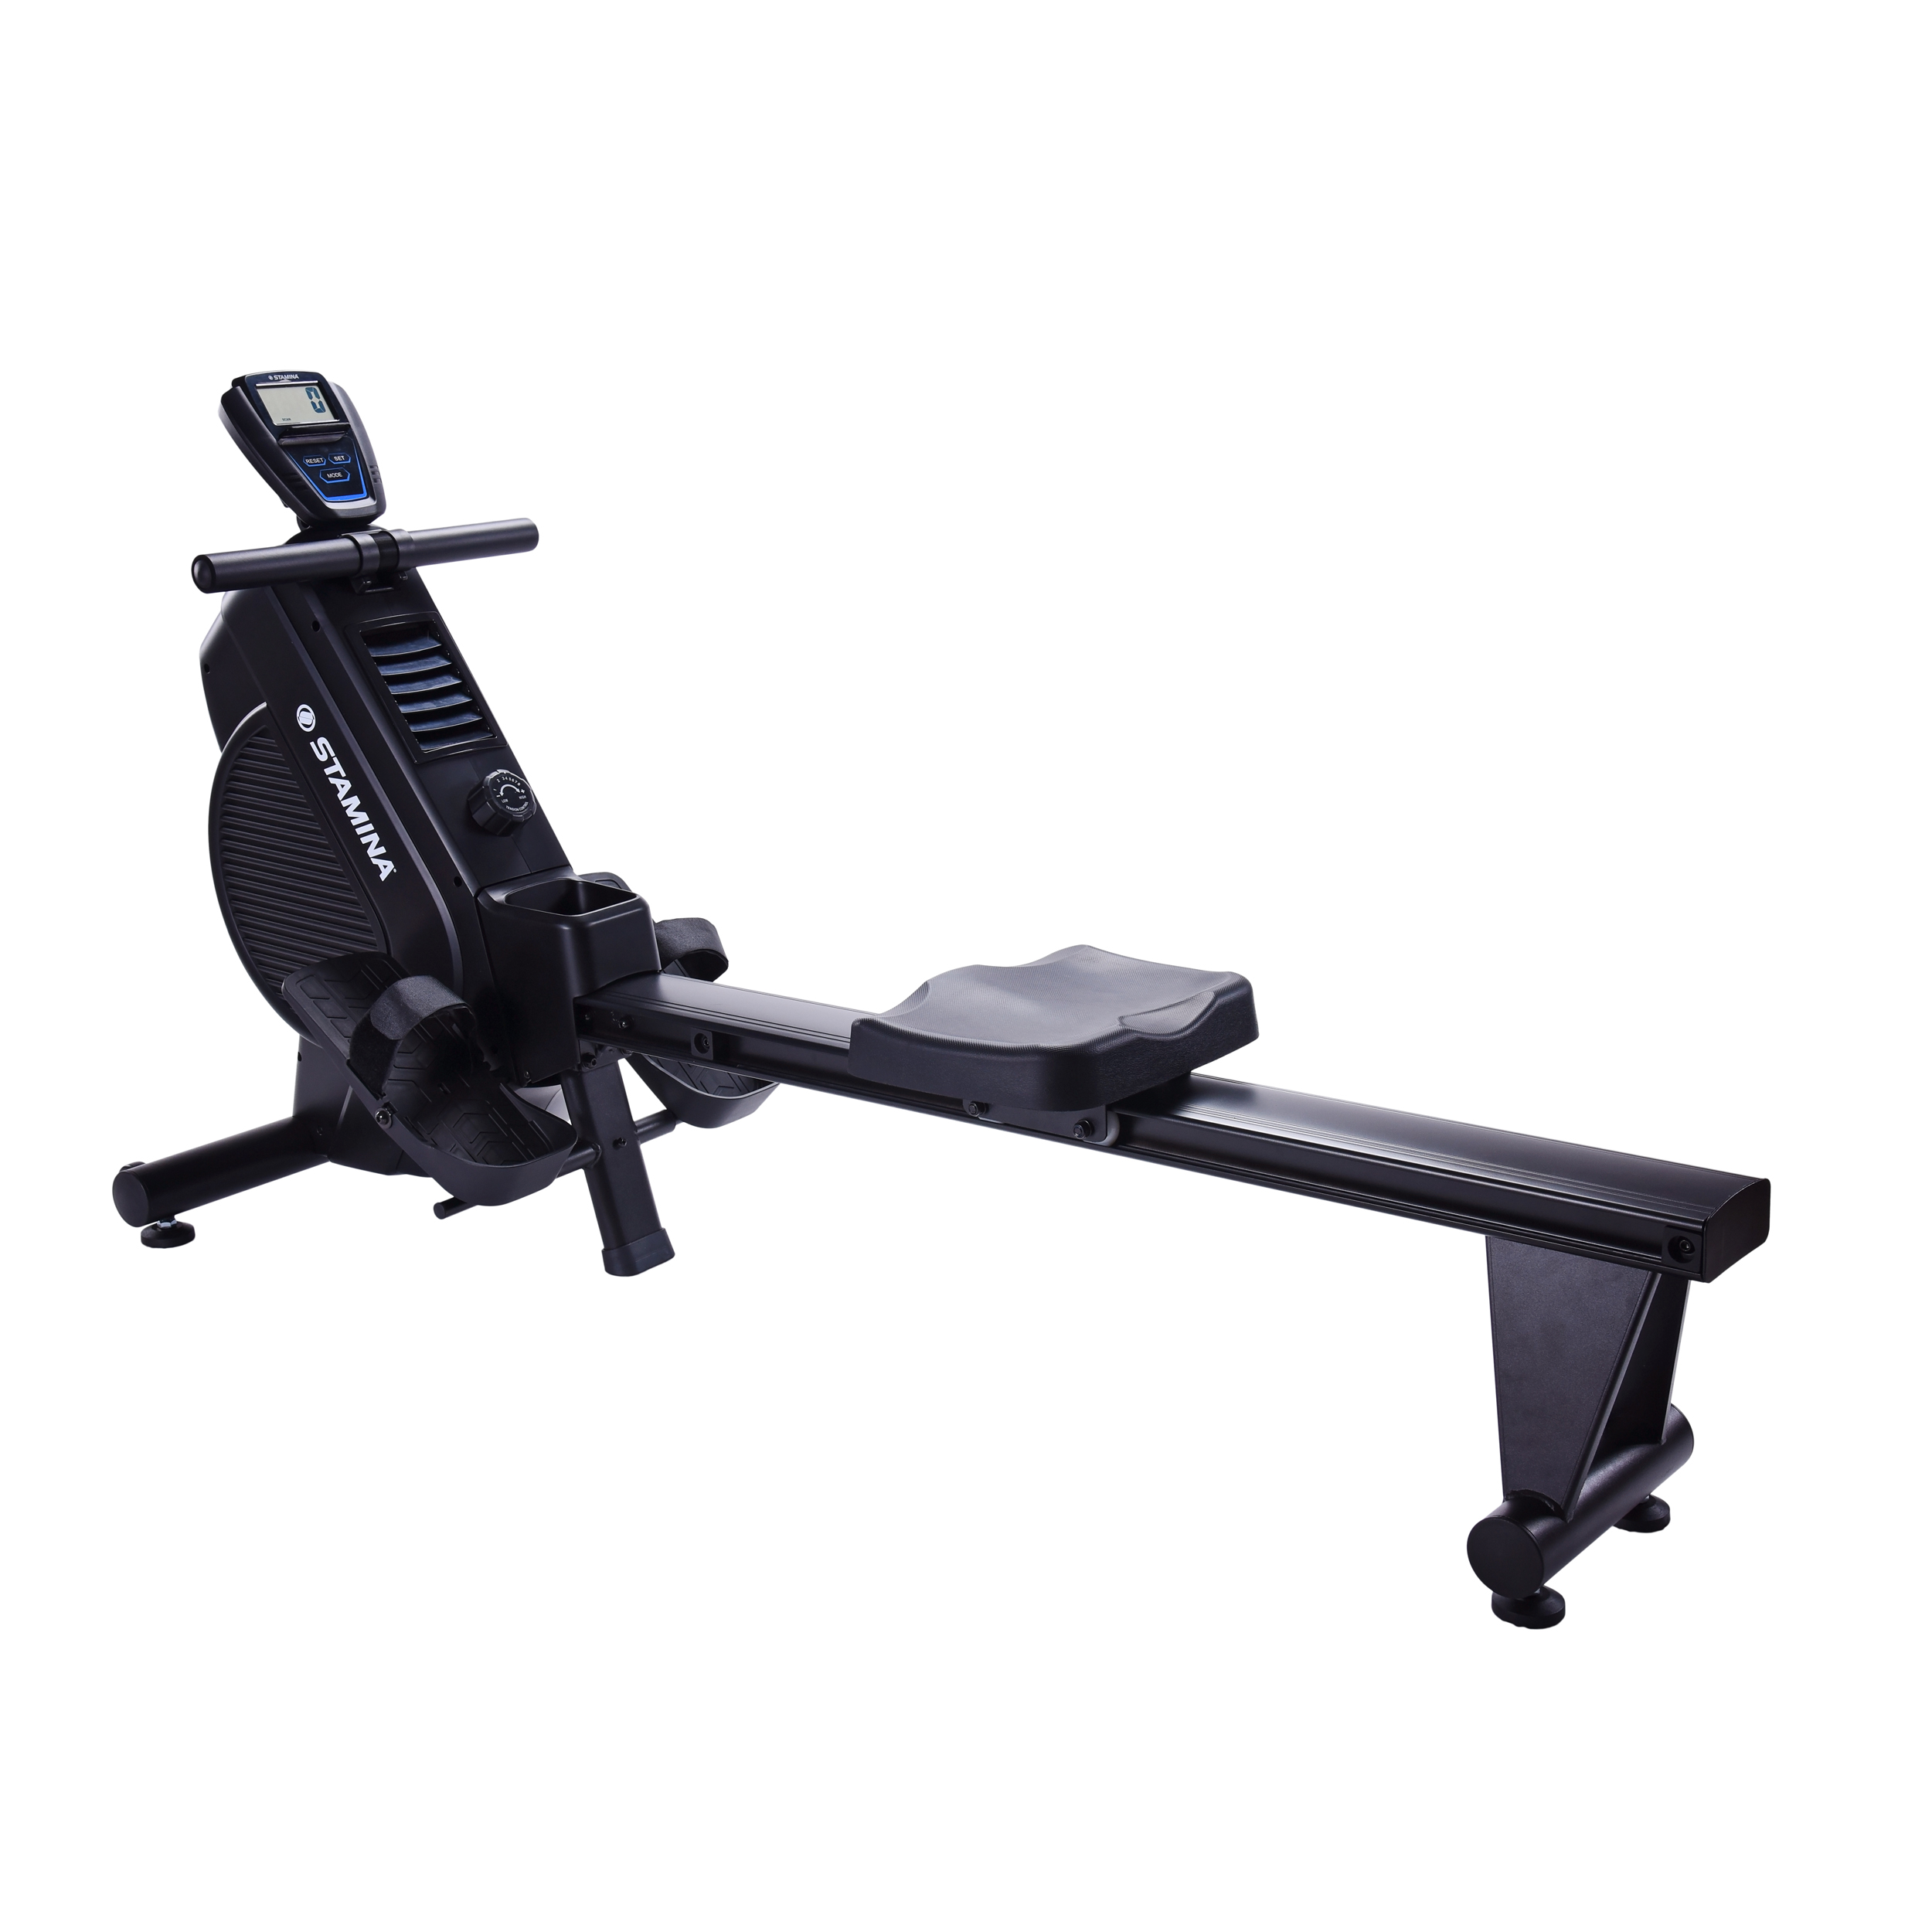 8 Rowing Machine Workouts for Effective Home Gym Training - Bells of Steel  Canada Blog